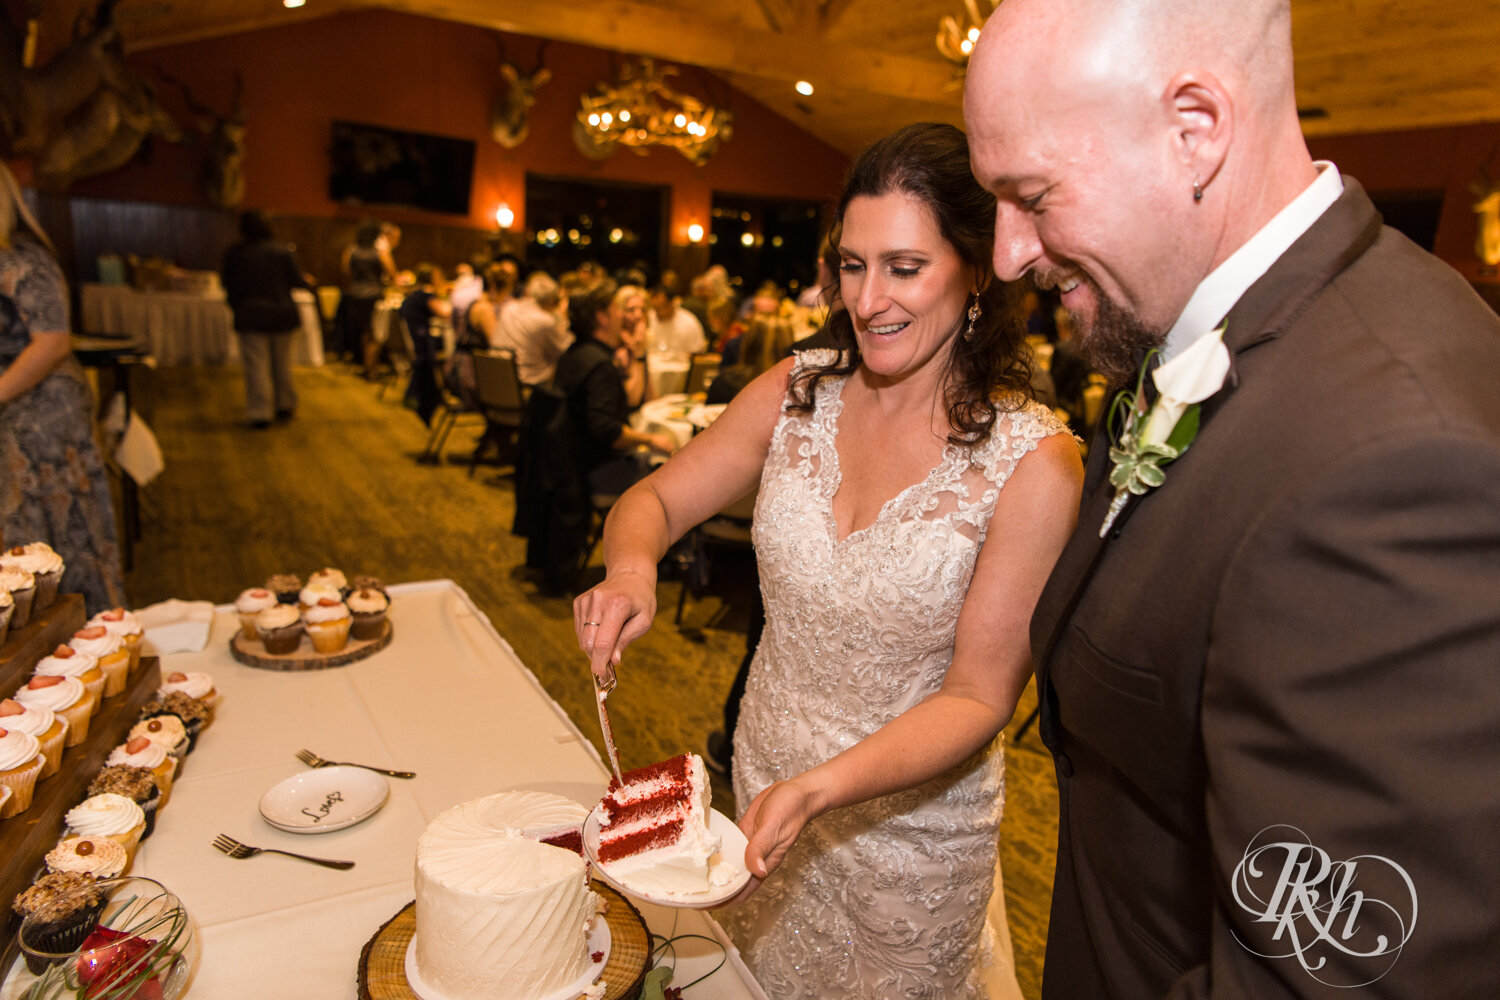 Bride and groom cut cake at wedding reception at Minnesota Horse and Hunt Club in Prior Lake, Minnesota.